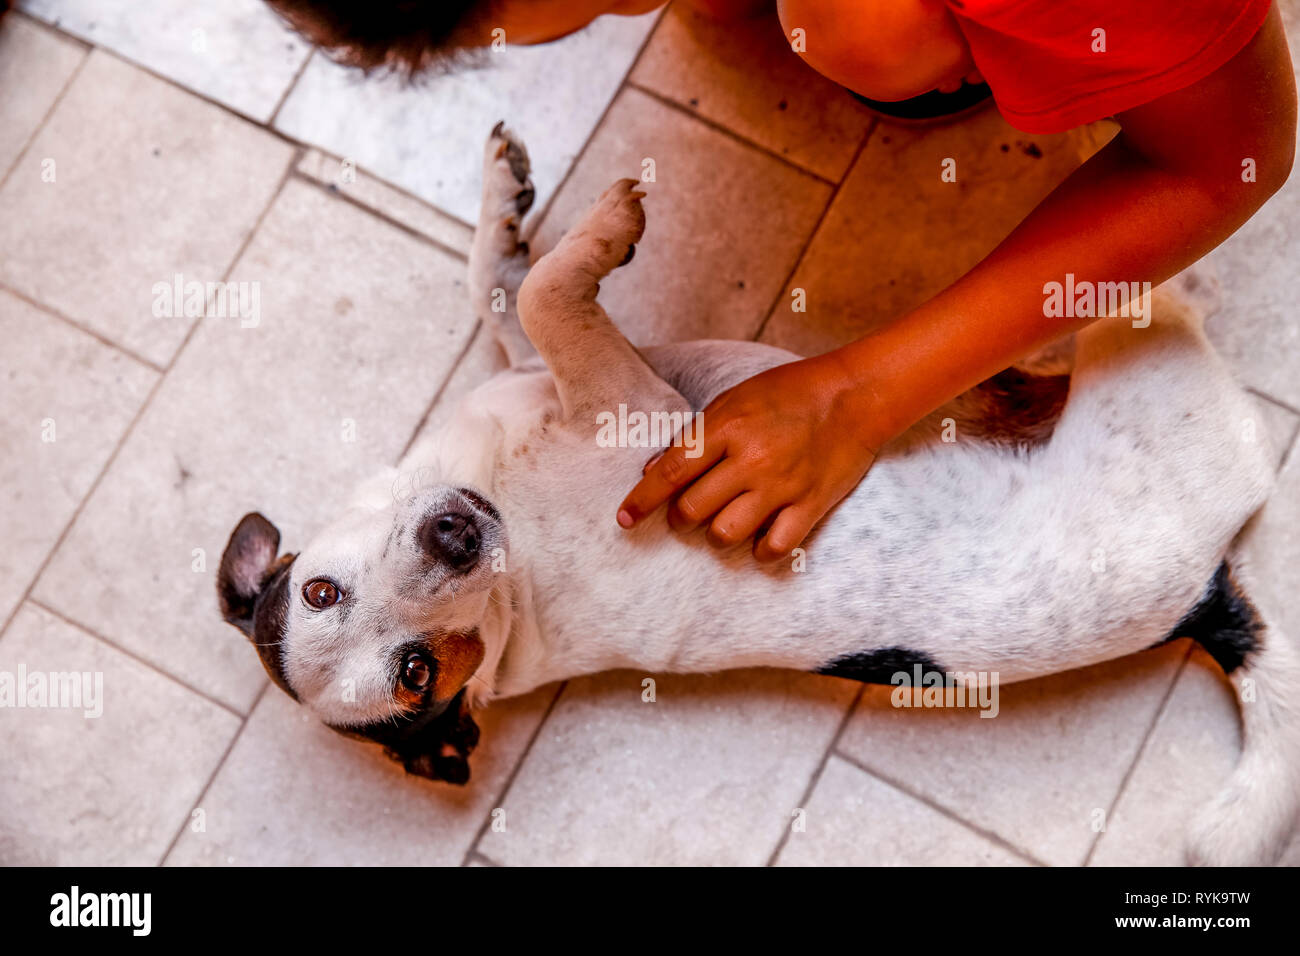 12-year-old boy stroking a dog in Catania, Sicily (Italy). Stock Photo